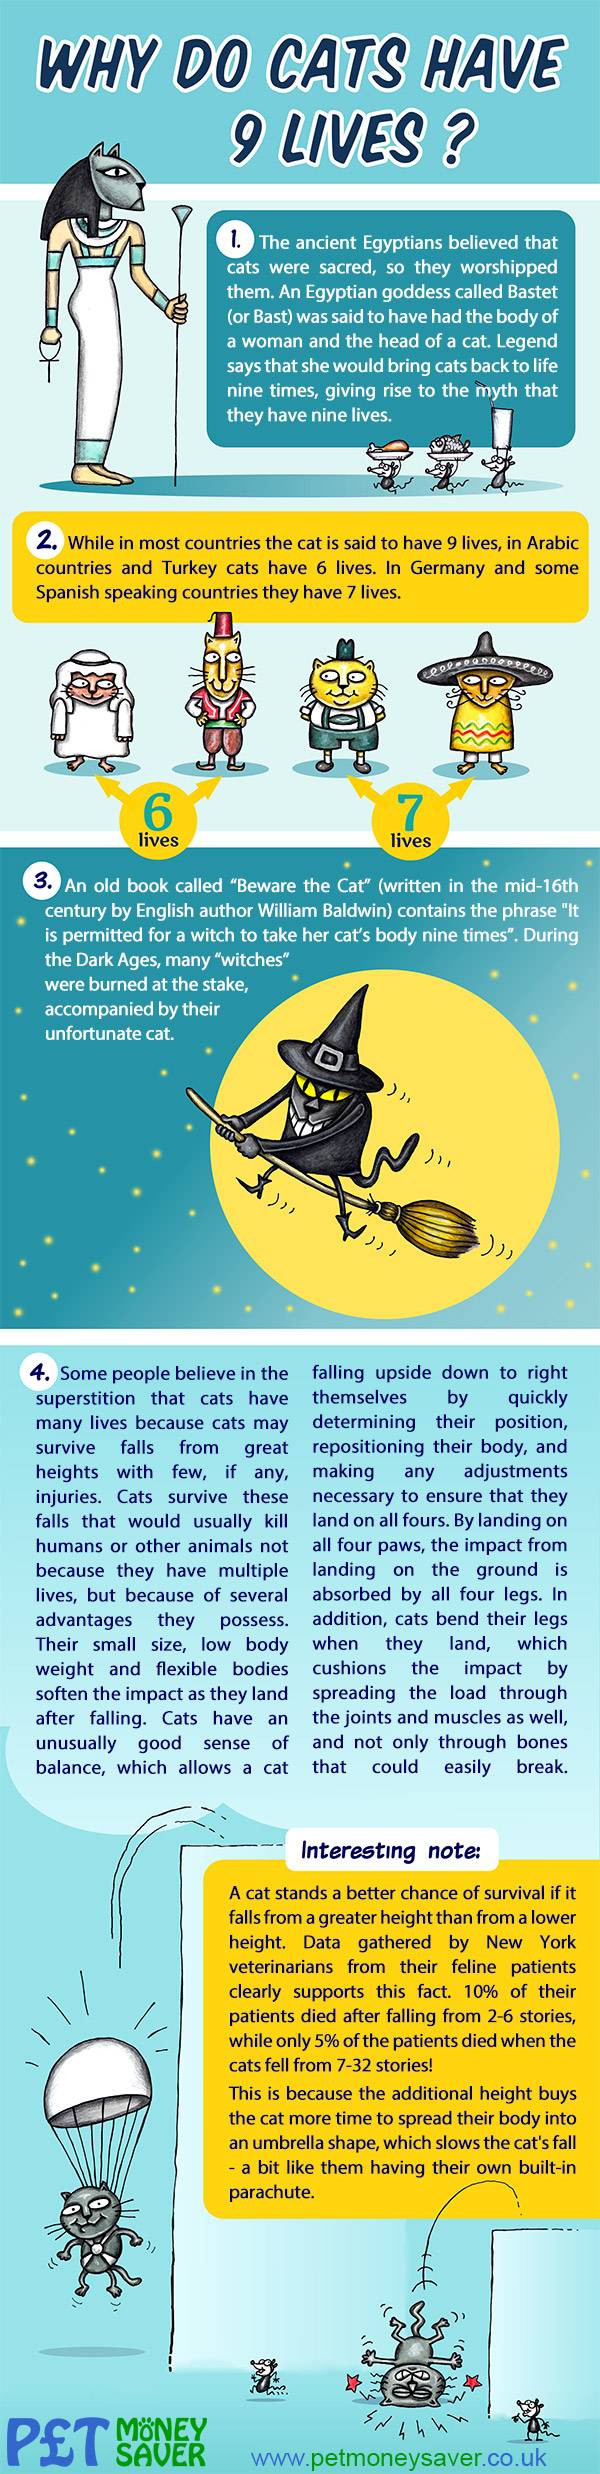 Infographic: Why do cats have 9 lives